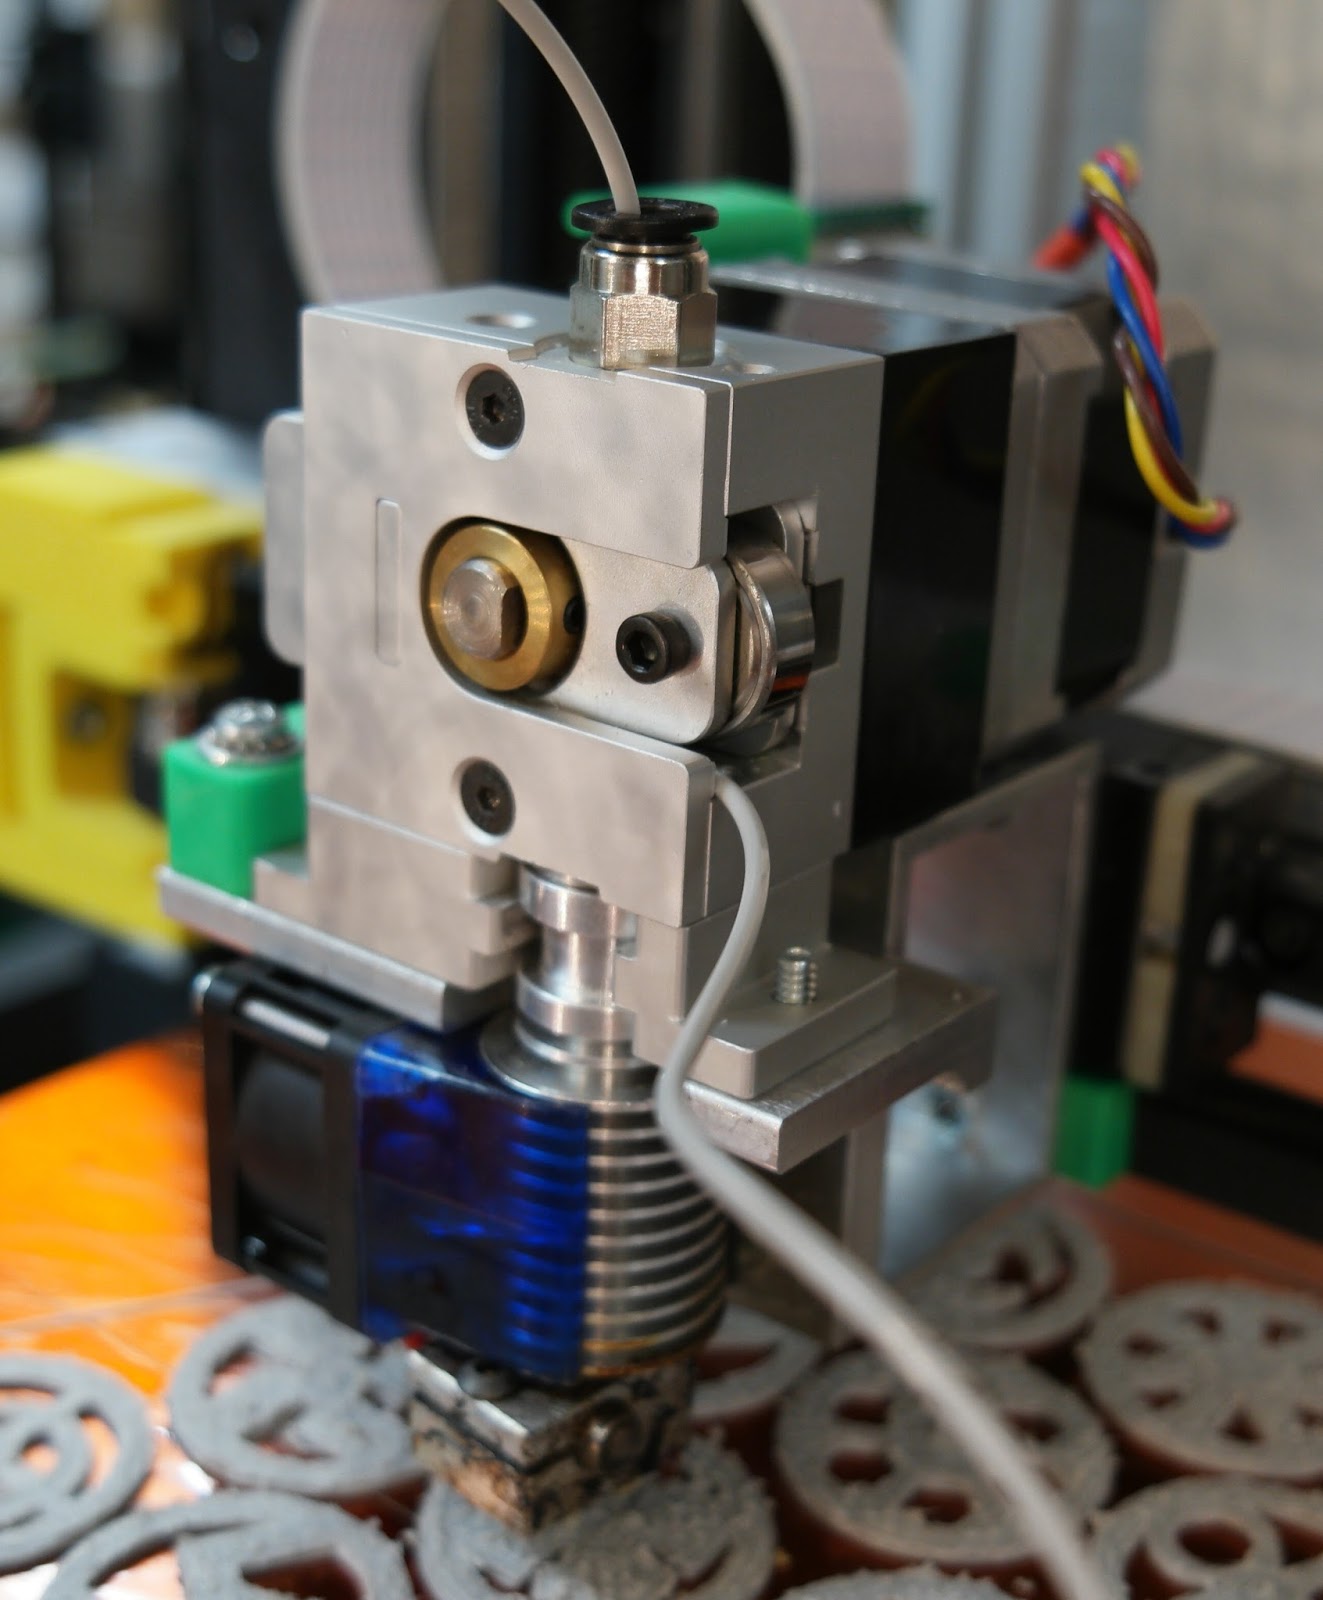 Mark Rehorst's Tech Topics: 3D Printer Hot-end and Extruder Designs - Oops